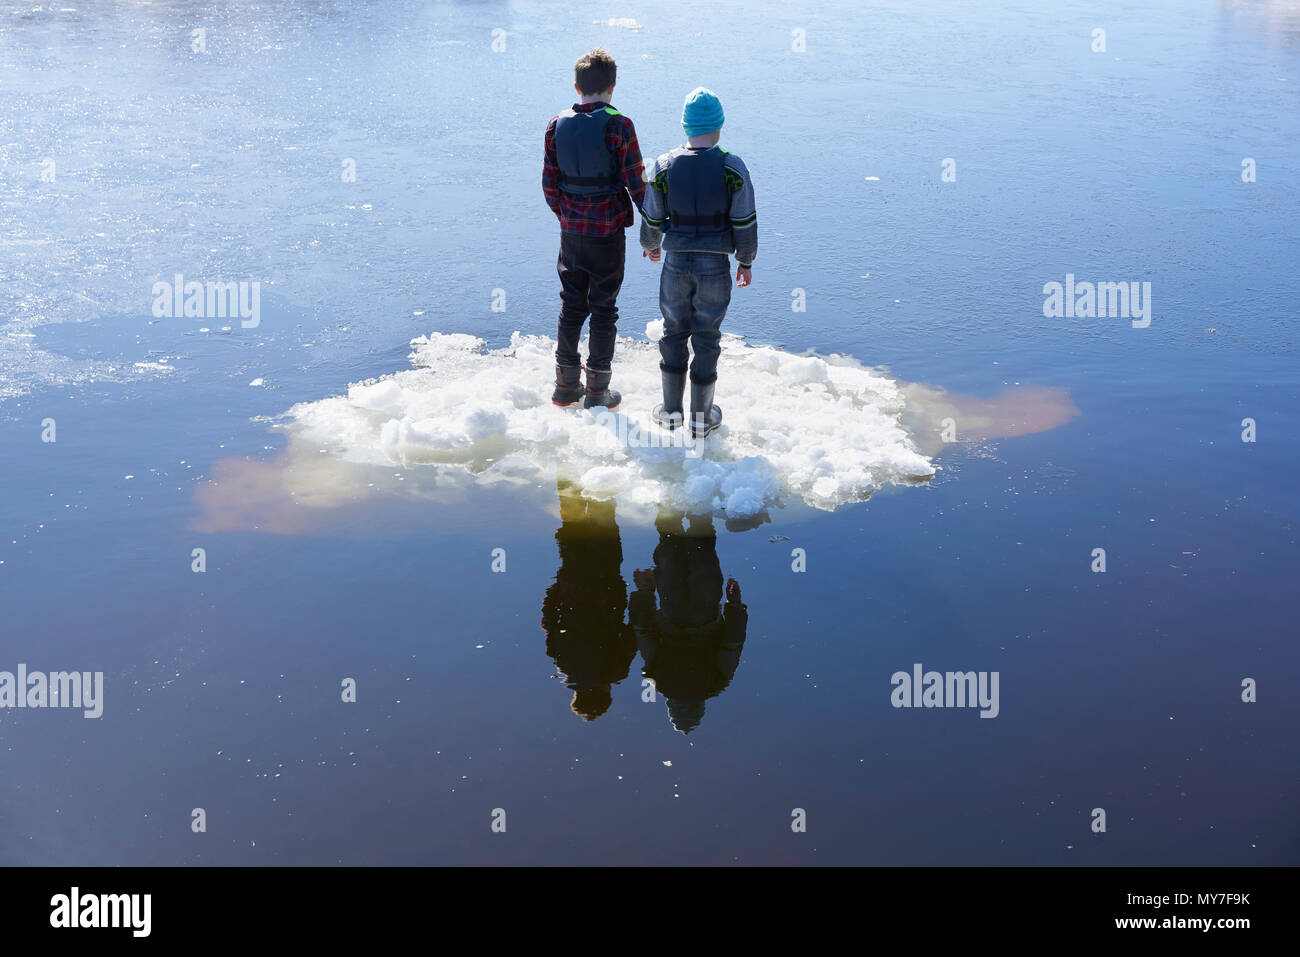 Two boys standing on ice, on lake, rear view Stock Photo